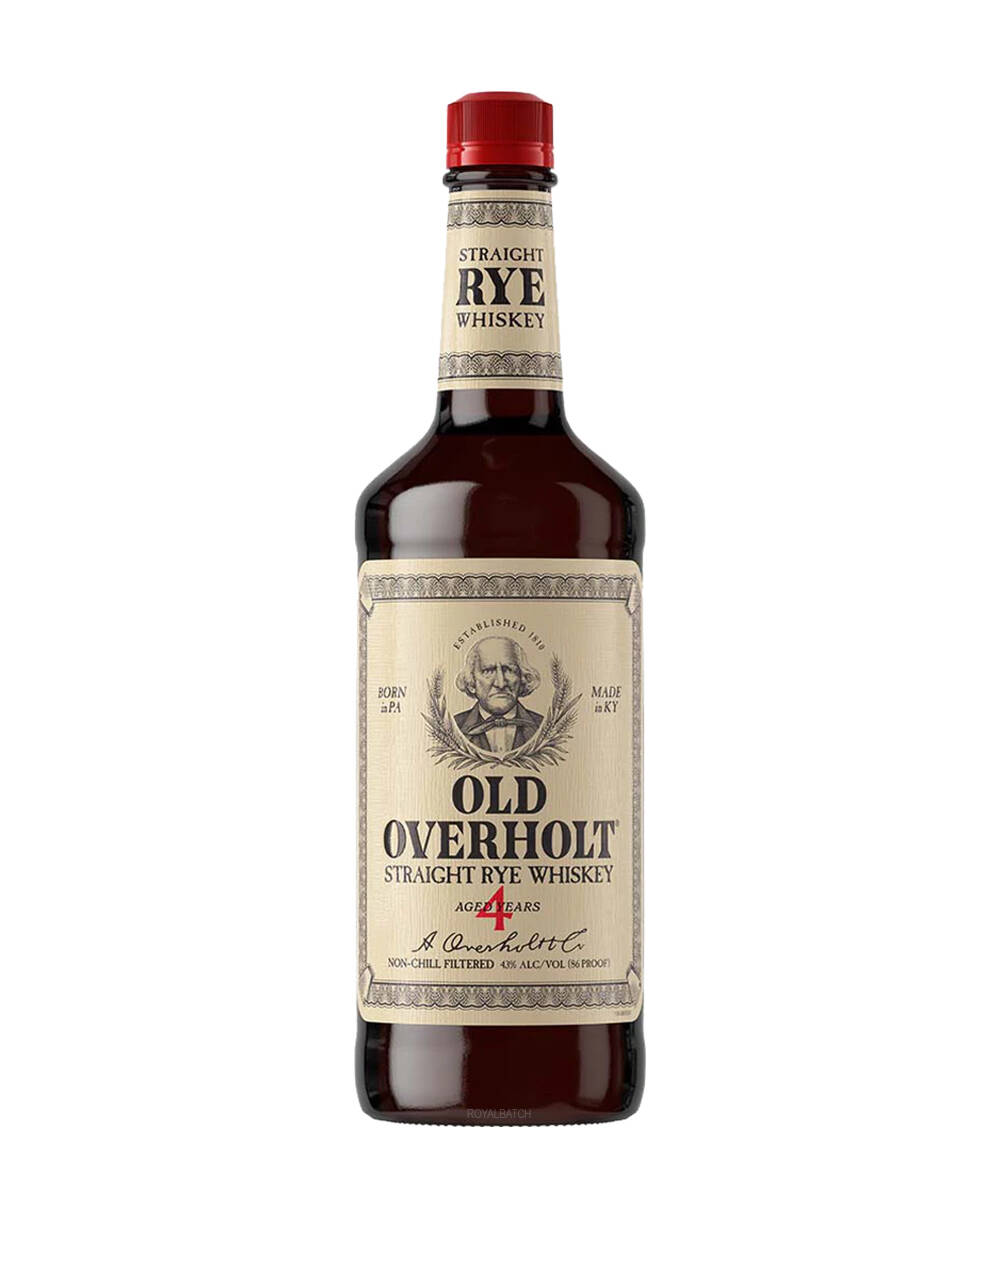 Old Overholt 4 Year Old Straight Rye Whiskey